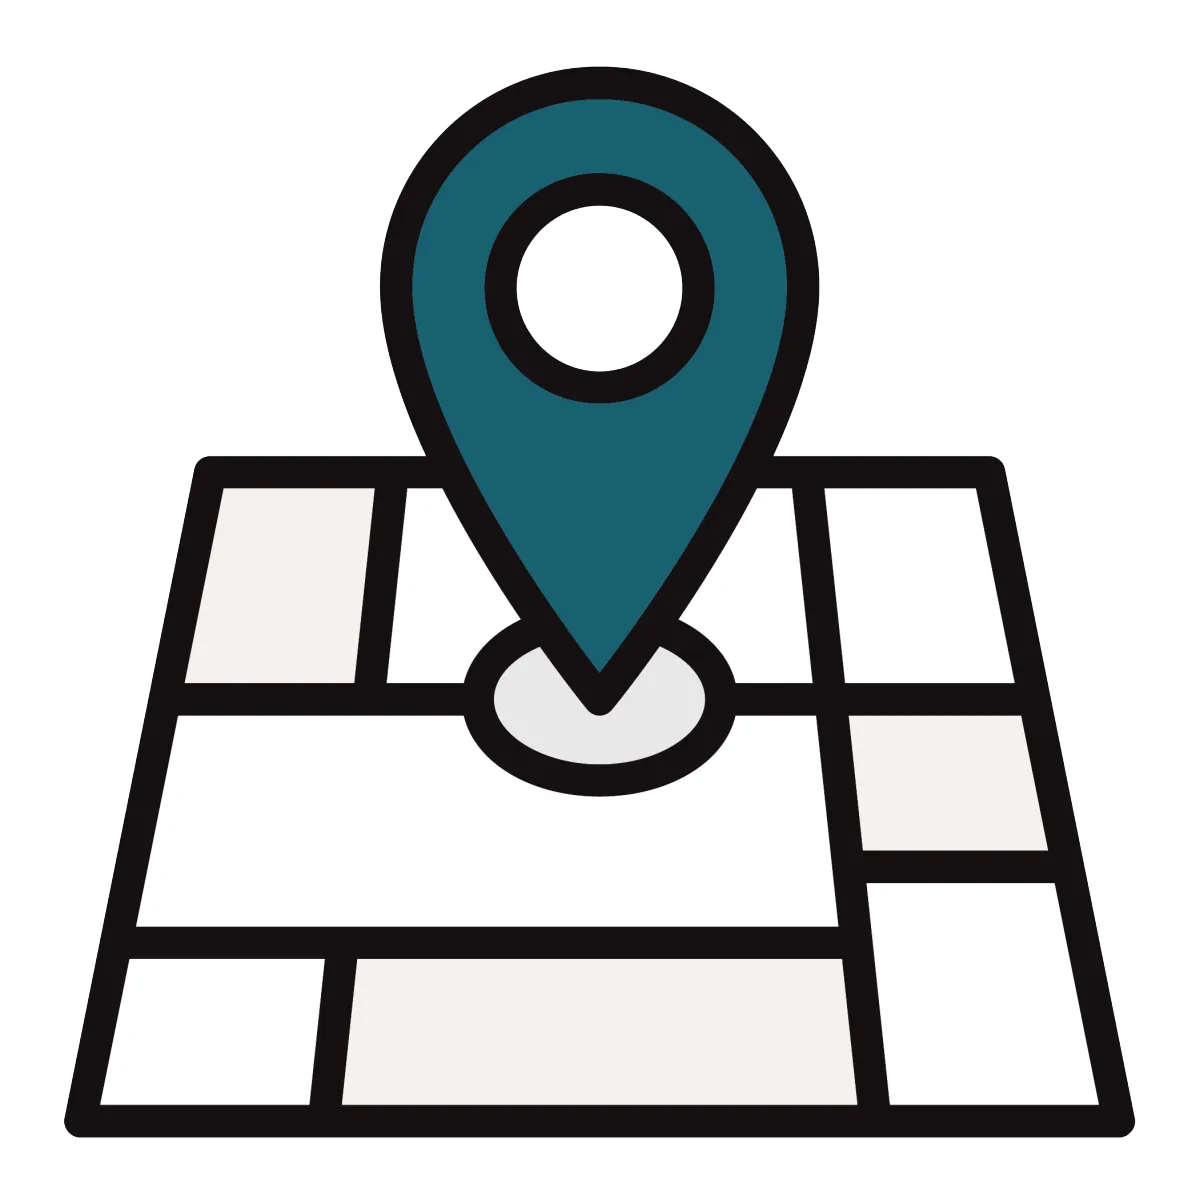 location pin on map icon